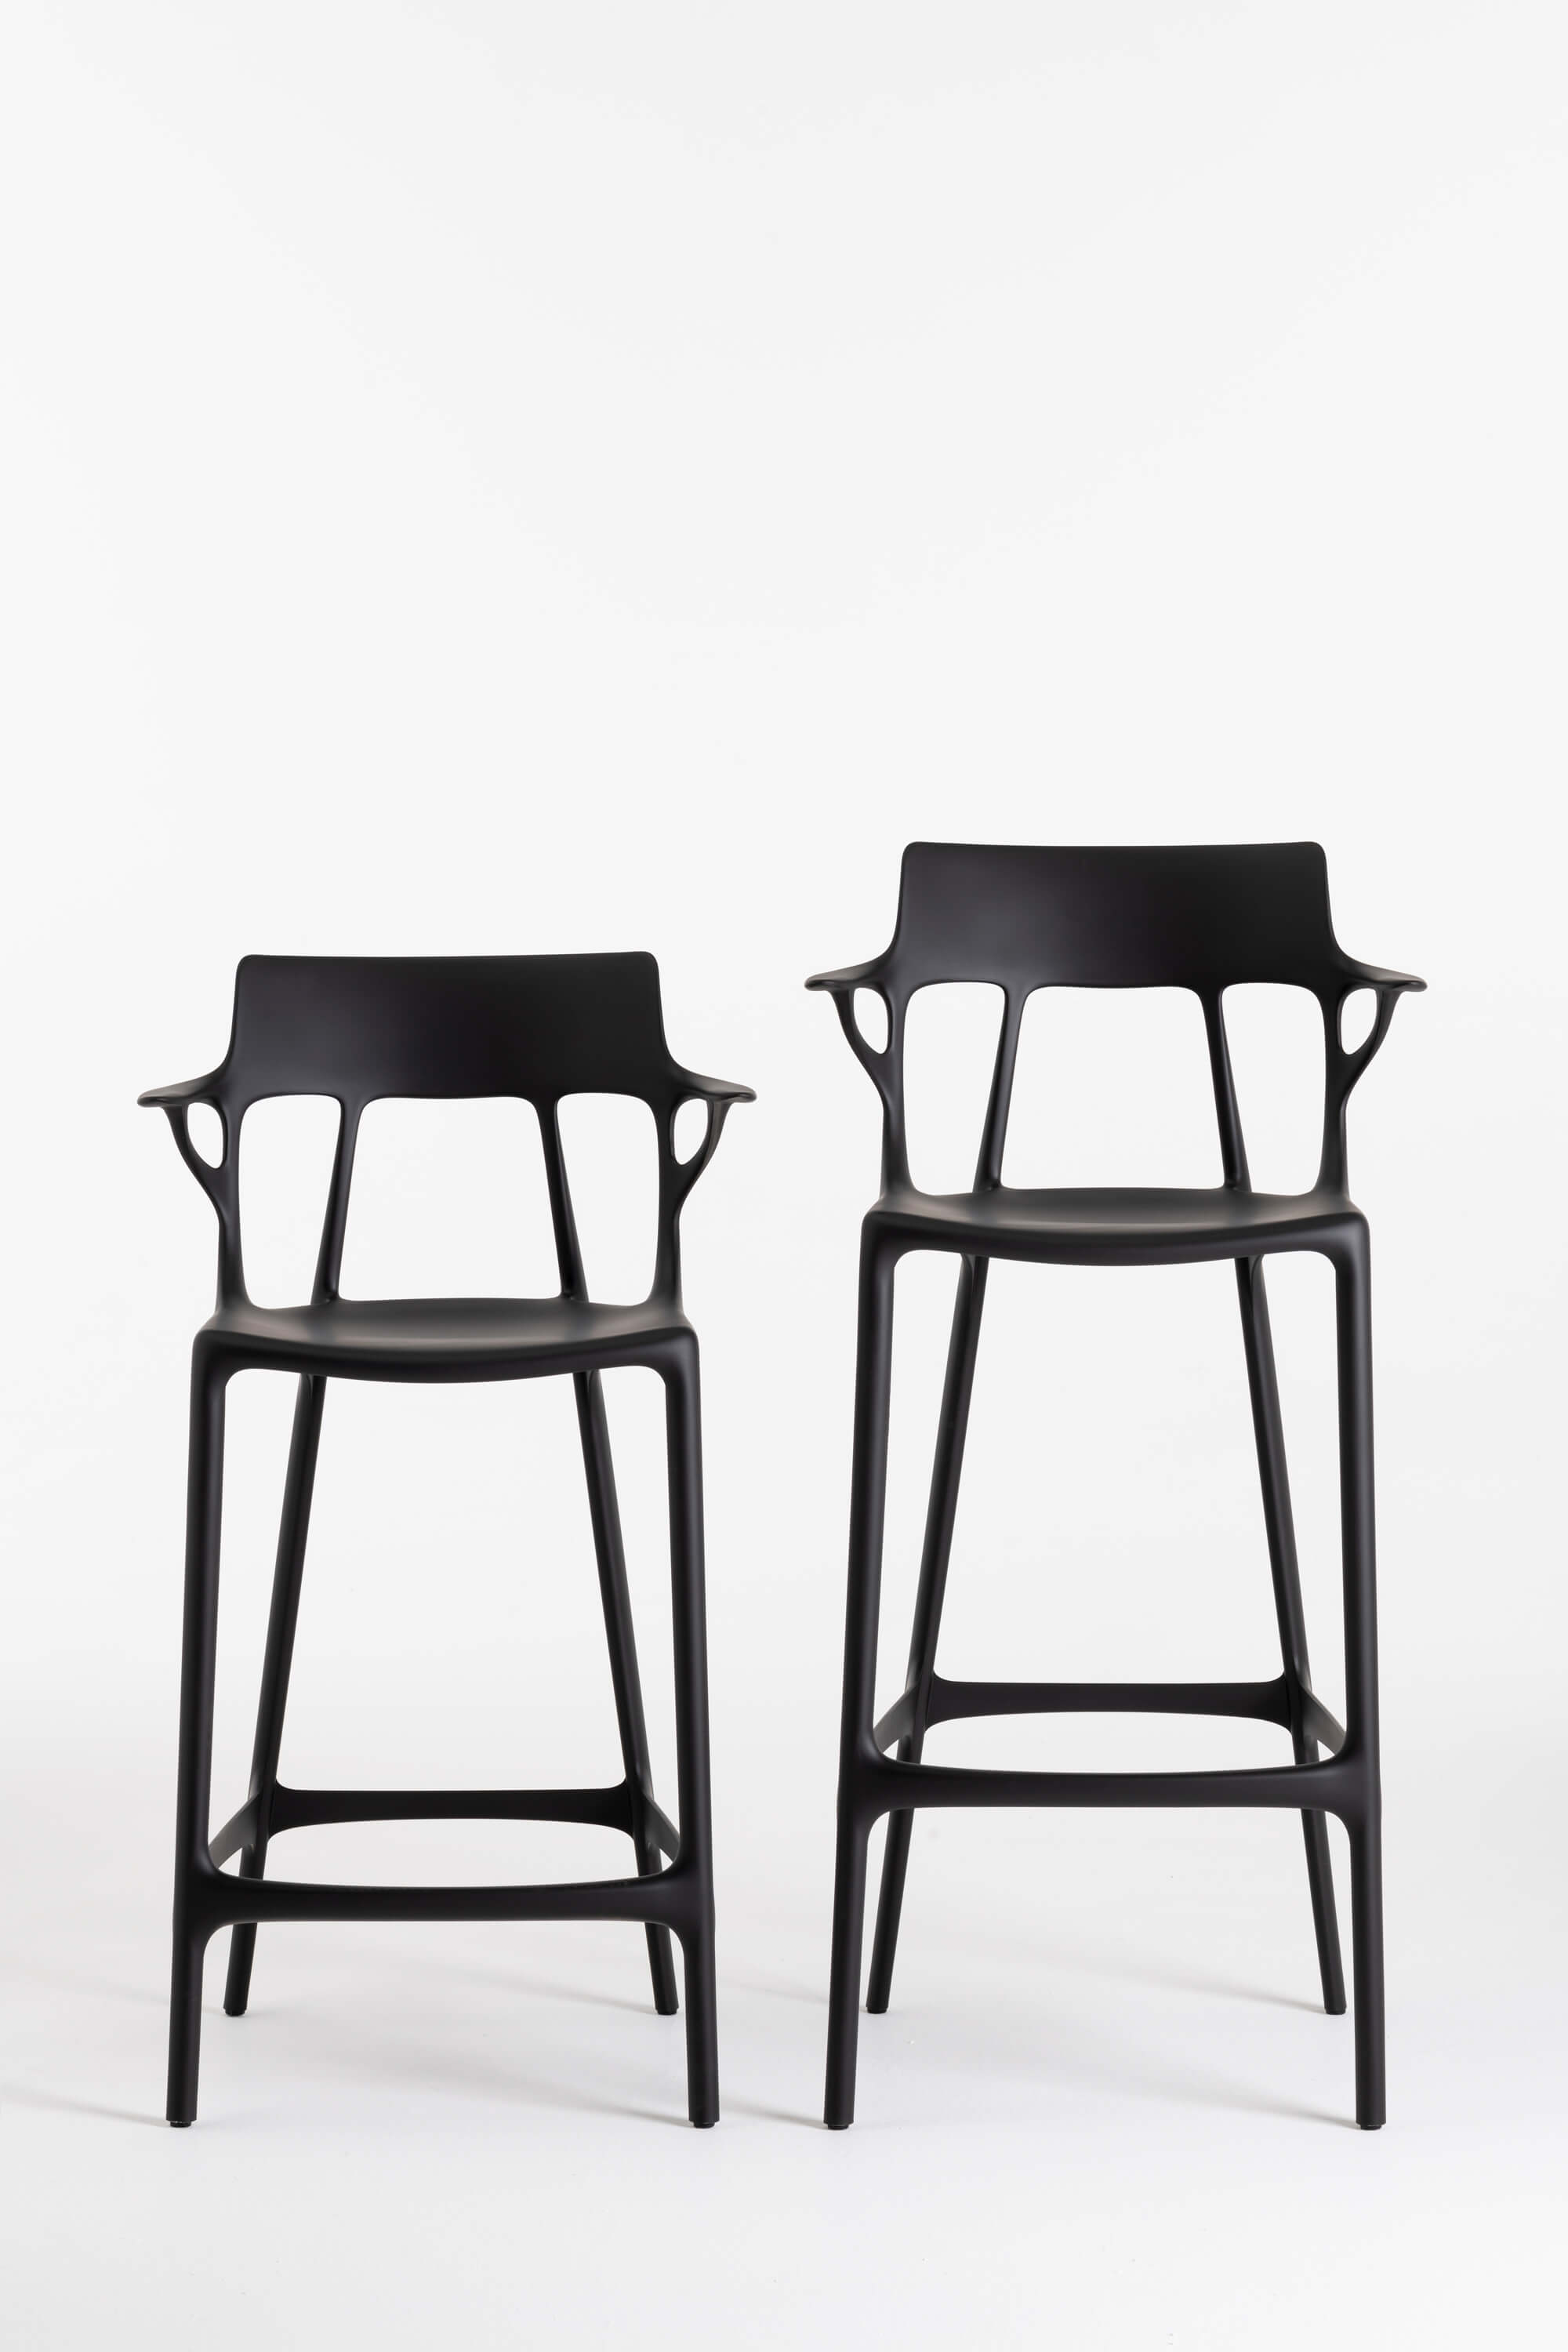 A.I STOOL (KARTELL) - Chairs